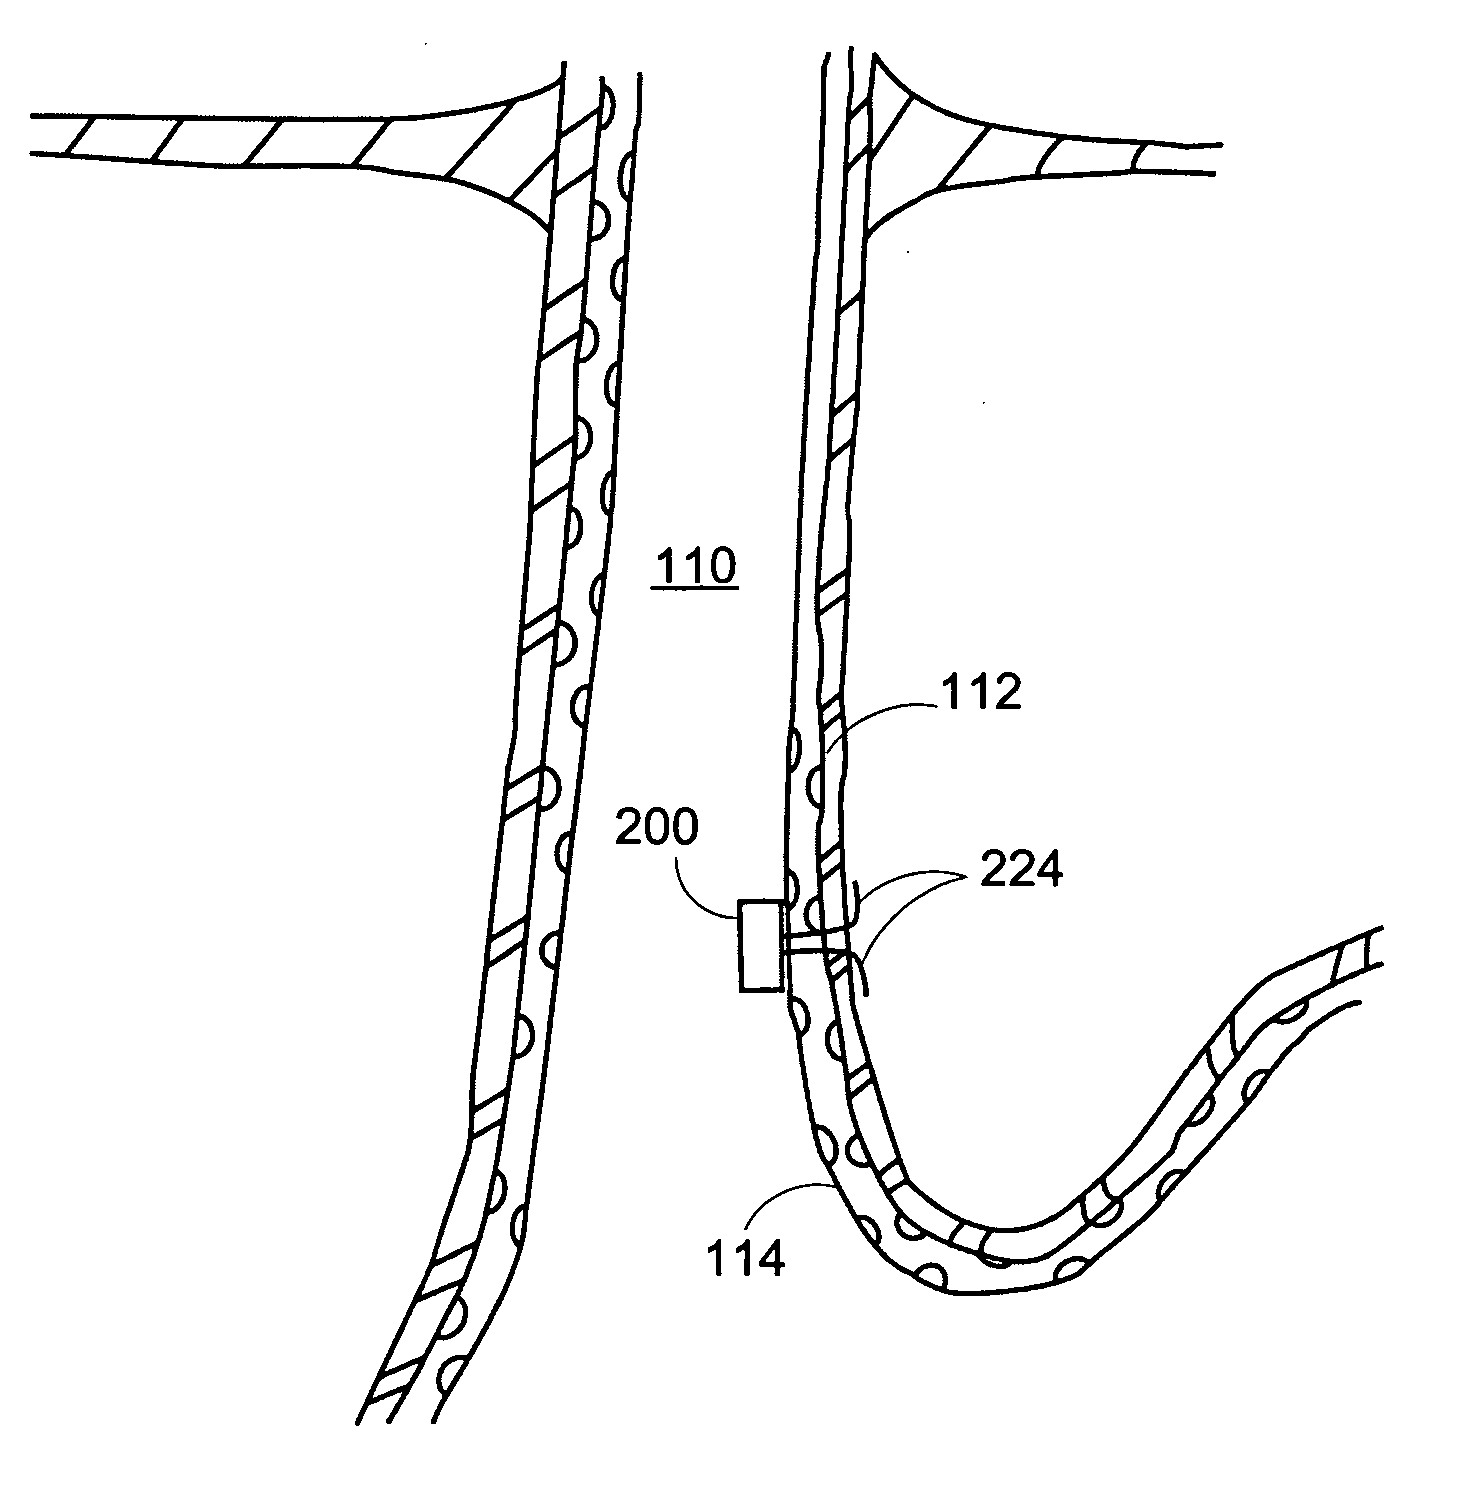 Methods and apparatus for implanting devices into non-sterile body lumens or organs